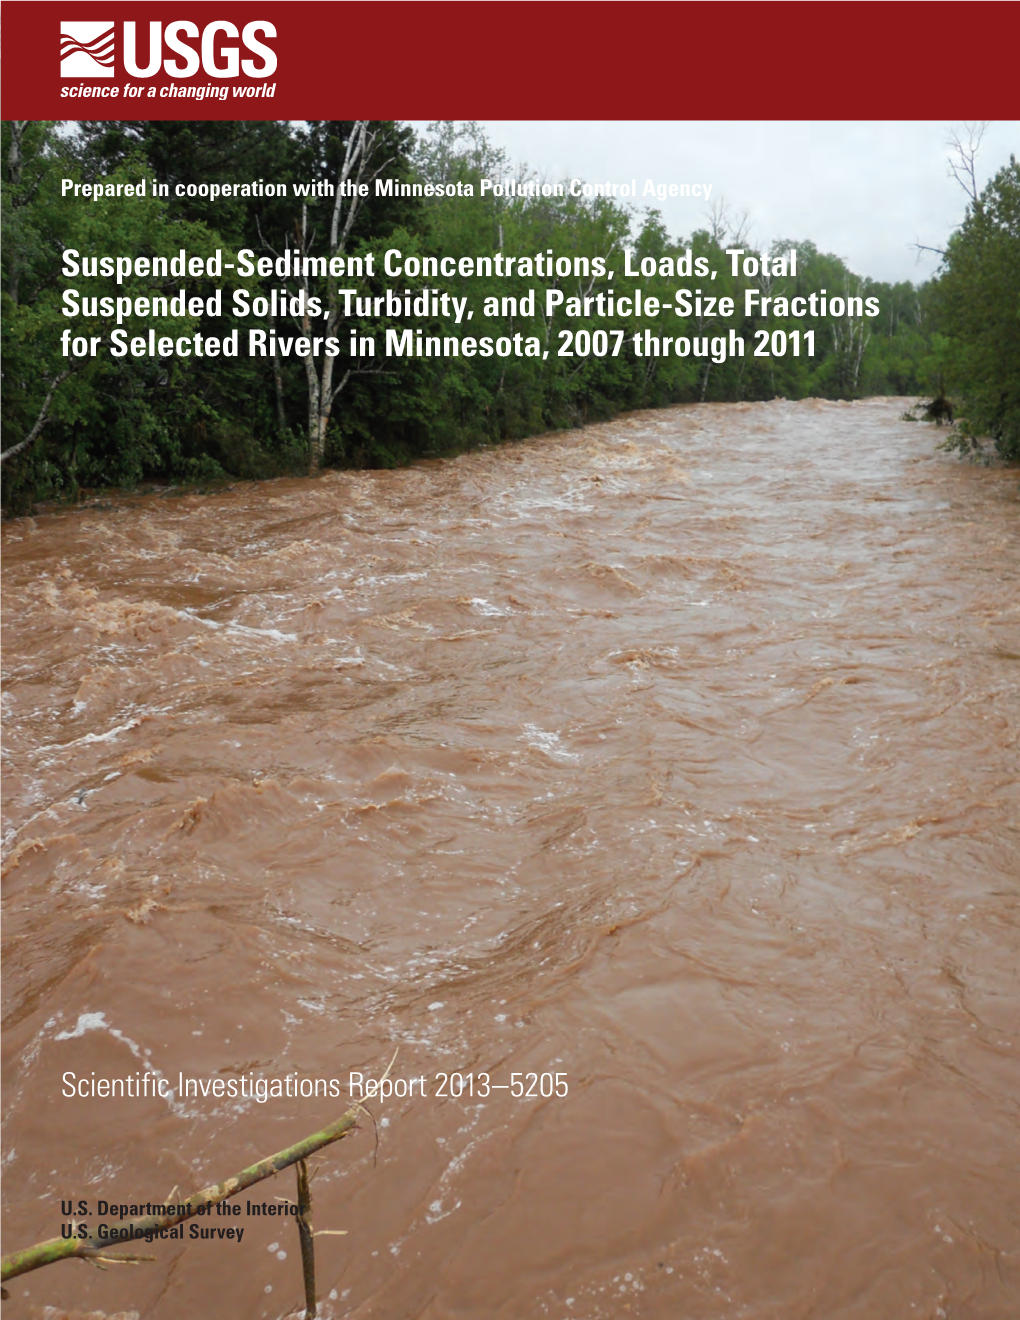 Suspended-Sediment Concentrations, Loads, Total Suspended Solids, Turbidity, and Particle-Size Fractions for Selected Rivers in Minnesota, 2007 Through 2011